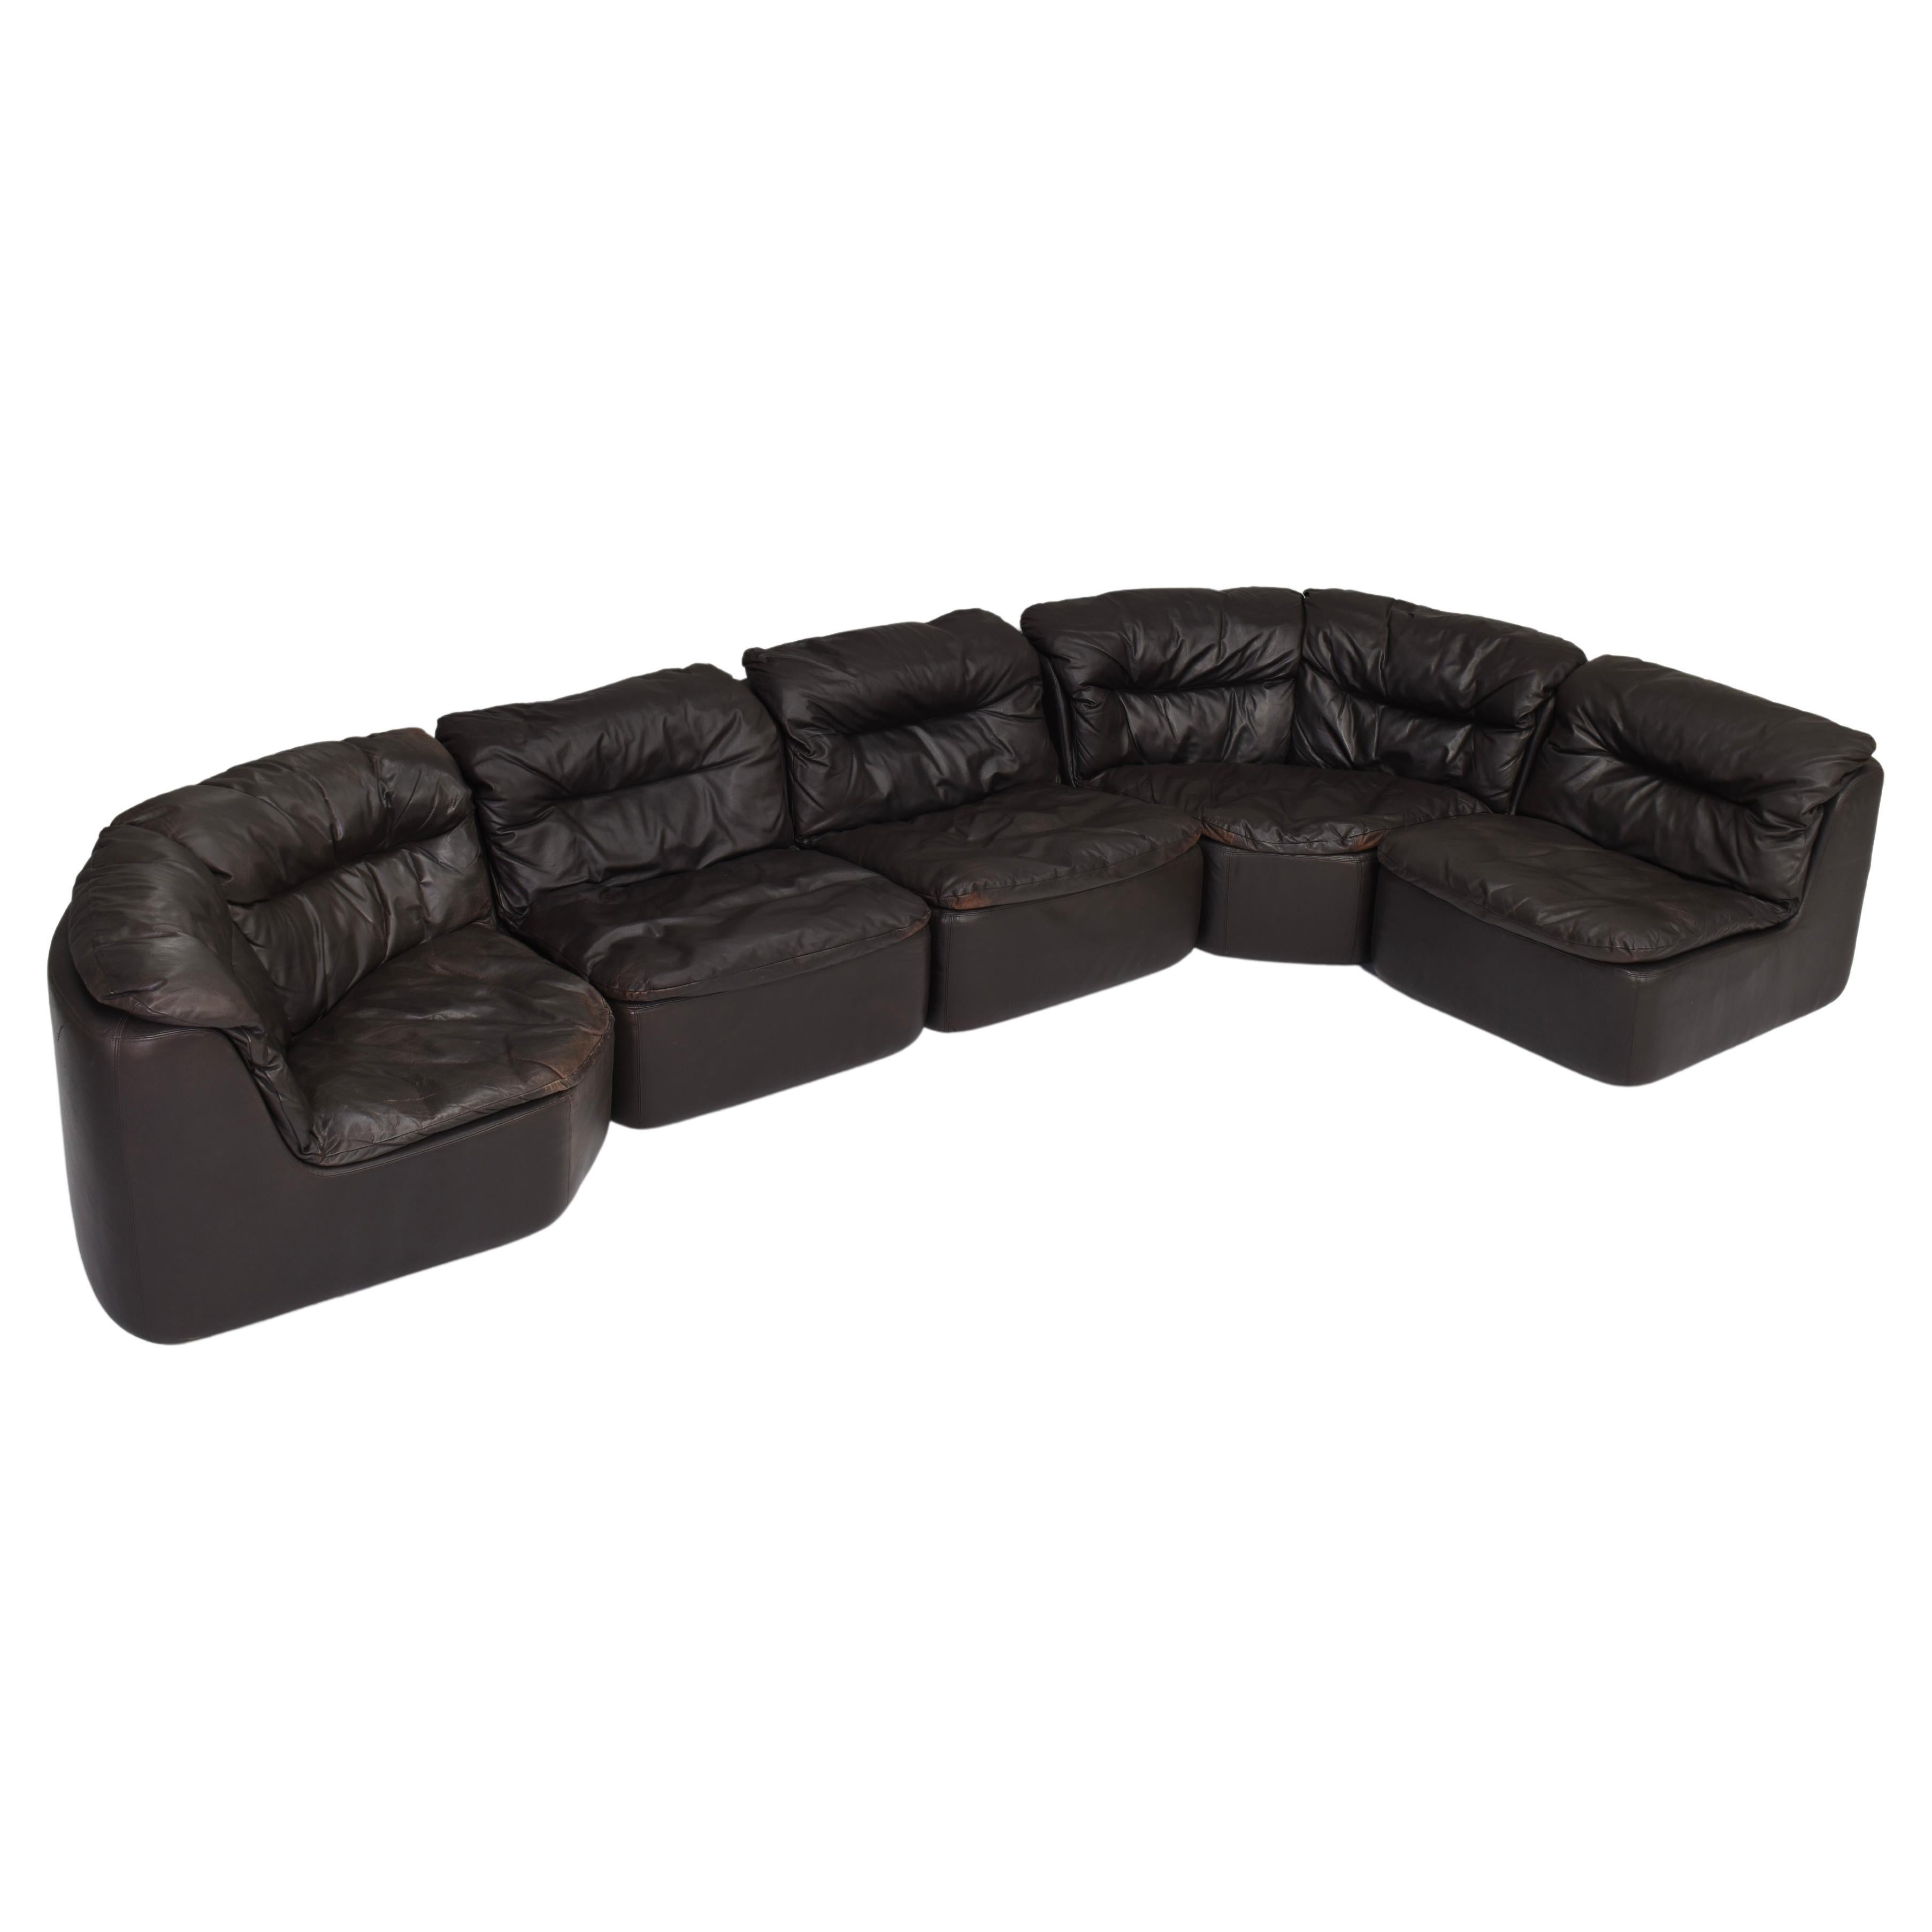 Walter Knoll Friedrich Hill Sectional Sofa Dark Brown Leather, Germany, 1972